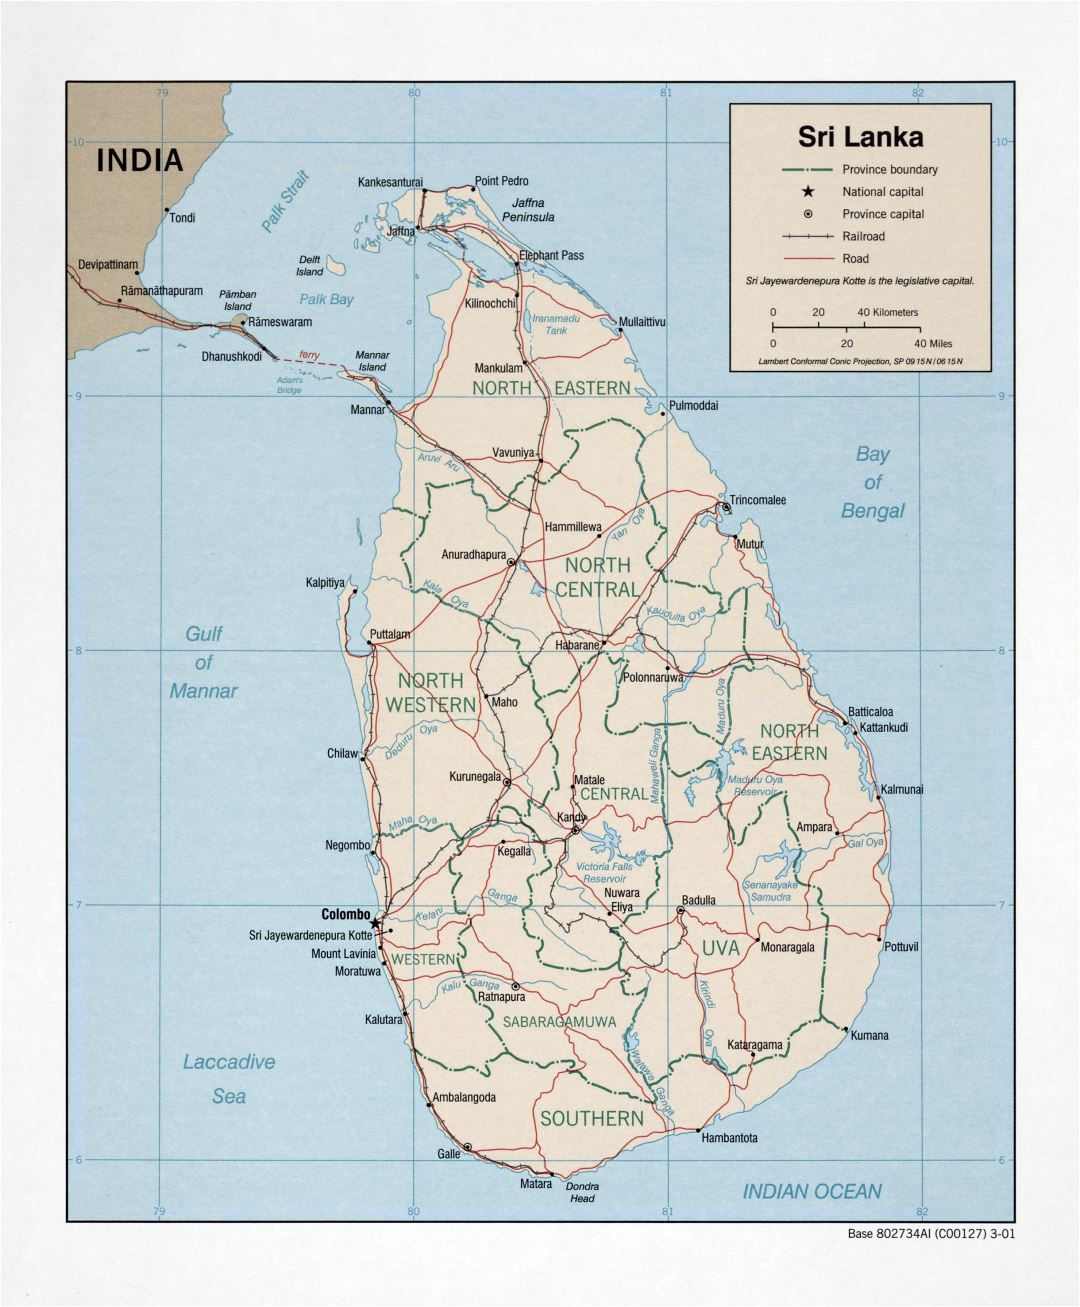 Large detailed political and administrative map of Sri Lanka with roads, railroads and major cities - 2001